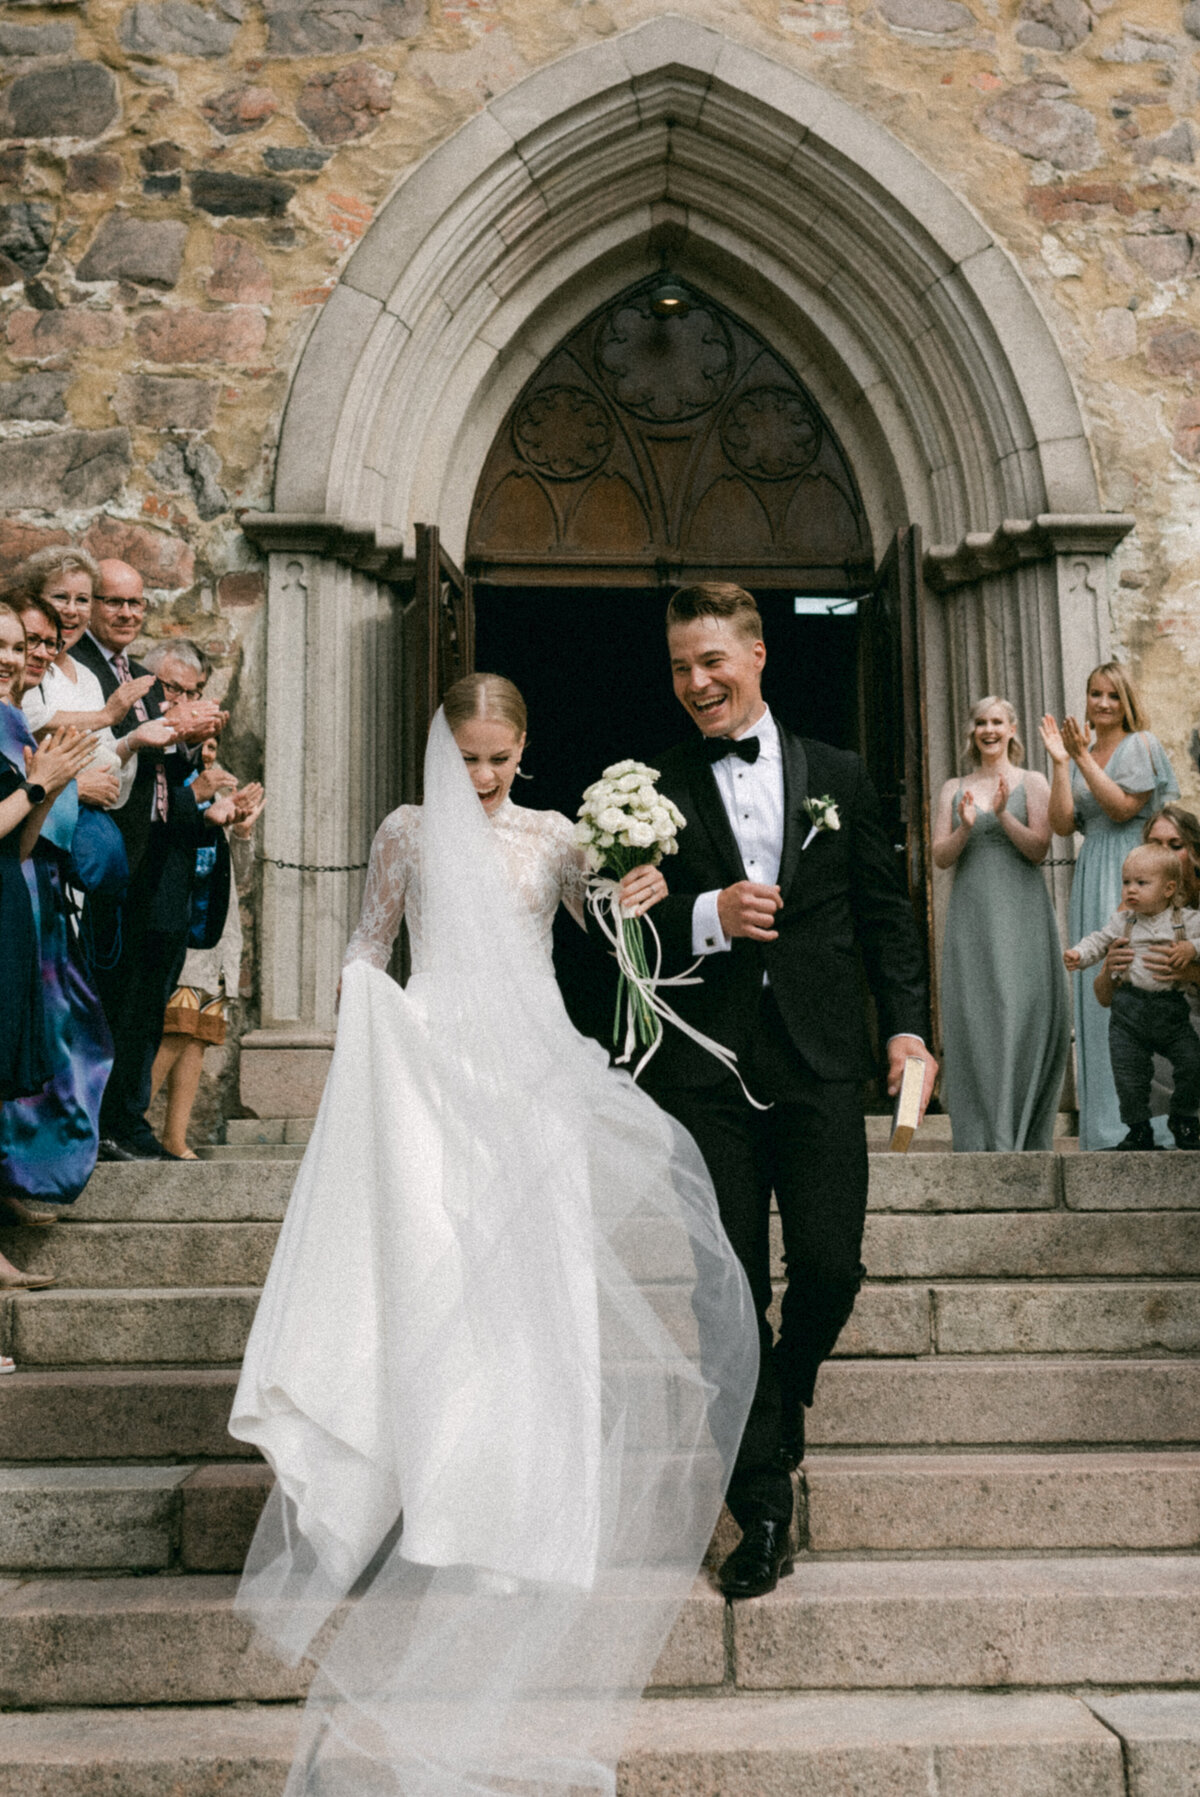 Bride and groom walking out of the church after wedding ceremony. The weil is flying in the wind and the couple is laughing. Photograph captured by wedding photographer Hannika Gabrielsson.